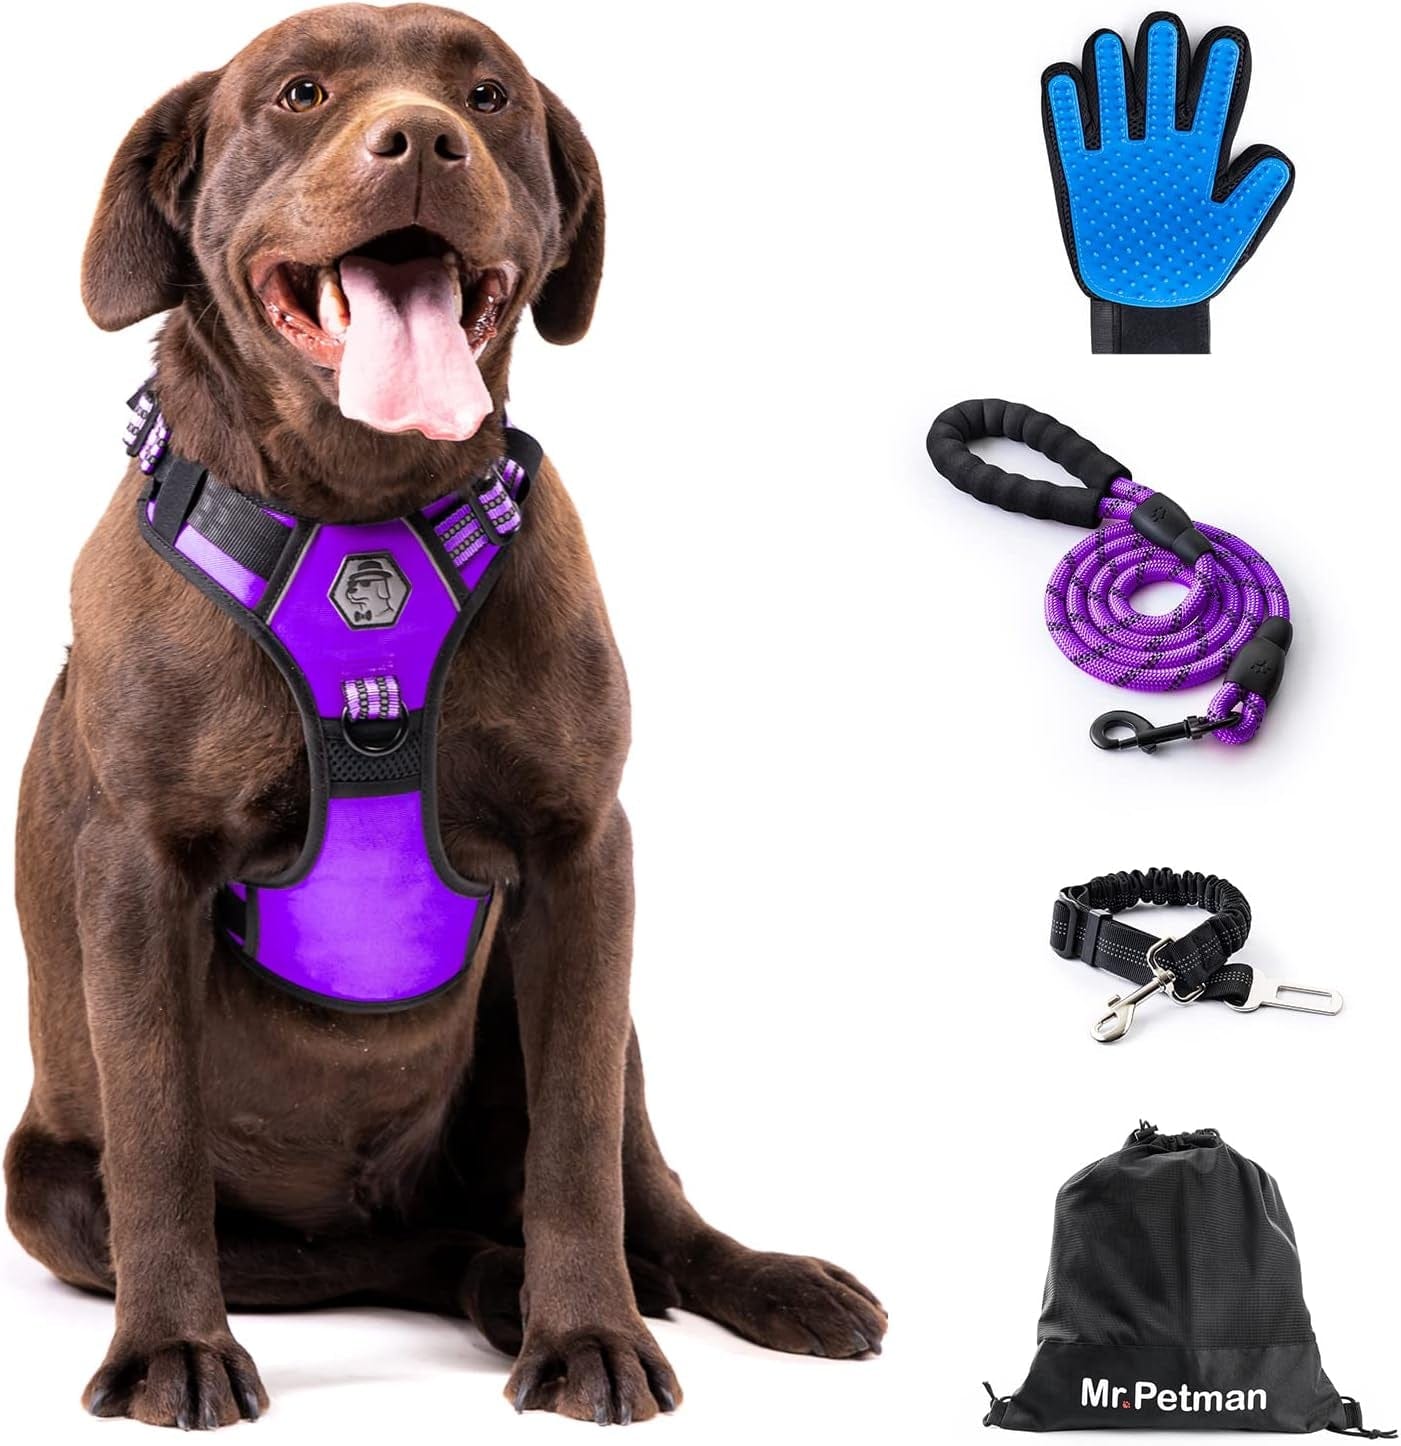 MR. PETMAN No Pull Dog Harness with Leash, Seat Belt, Grooming Glove - No Choke Dog Harness Set for Small Medium Large Dogs- Reflective Adjustable Dog Vest Harnesses with Handle for Walking Training Animals & Pet Supplies > Pet Supplies > Dog Supplies > Dog Apparel Mr. Petman Modern Purple X-Large 